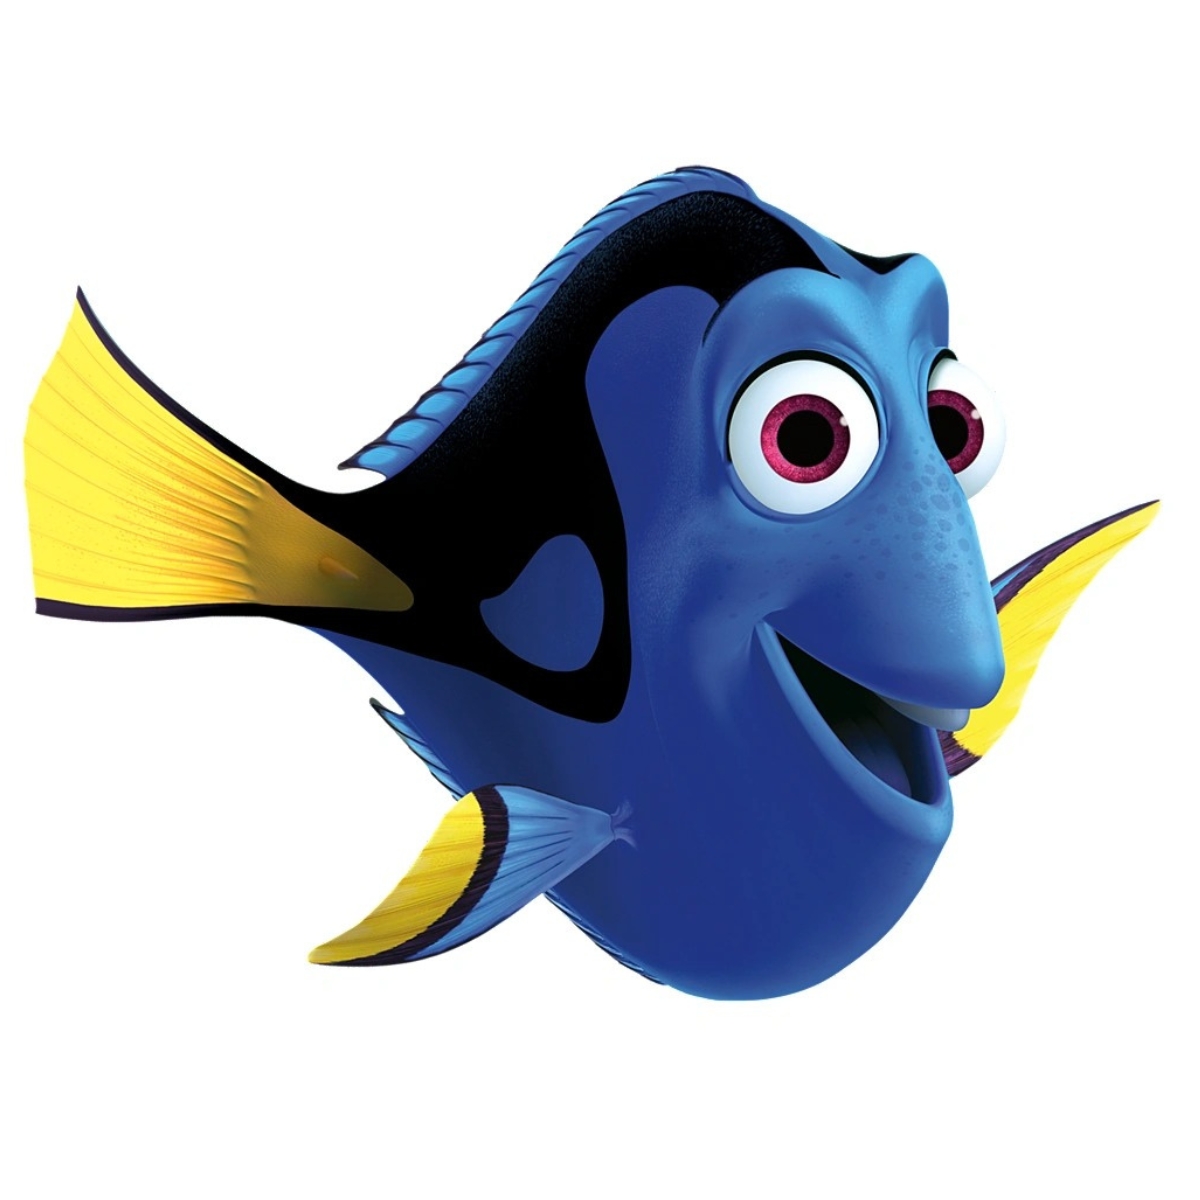 19-facts-about-dory-finding-nemo